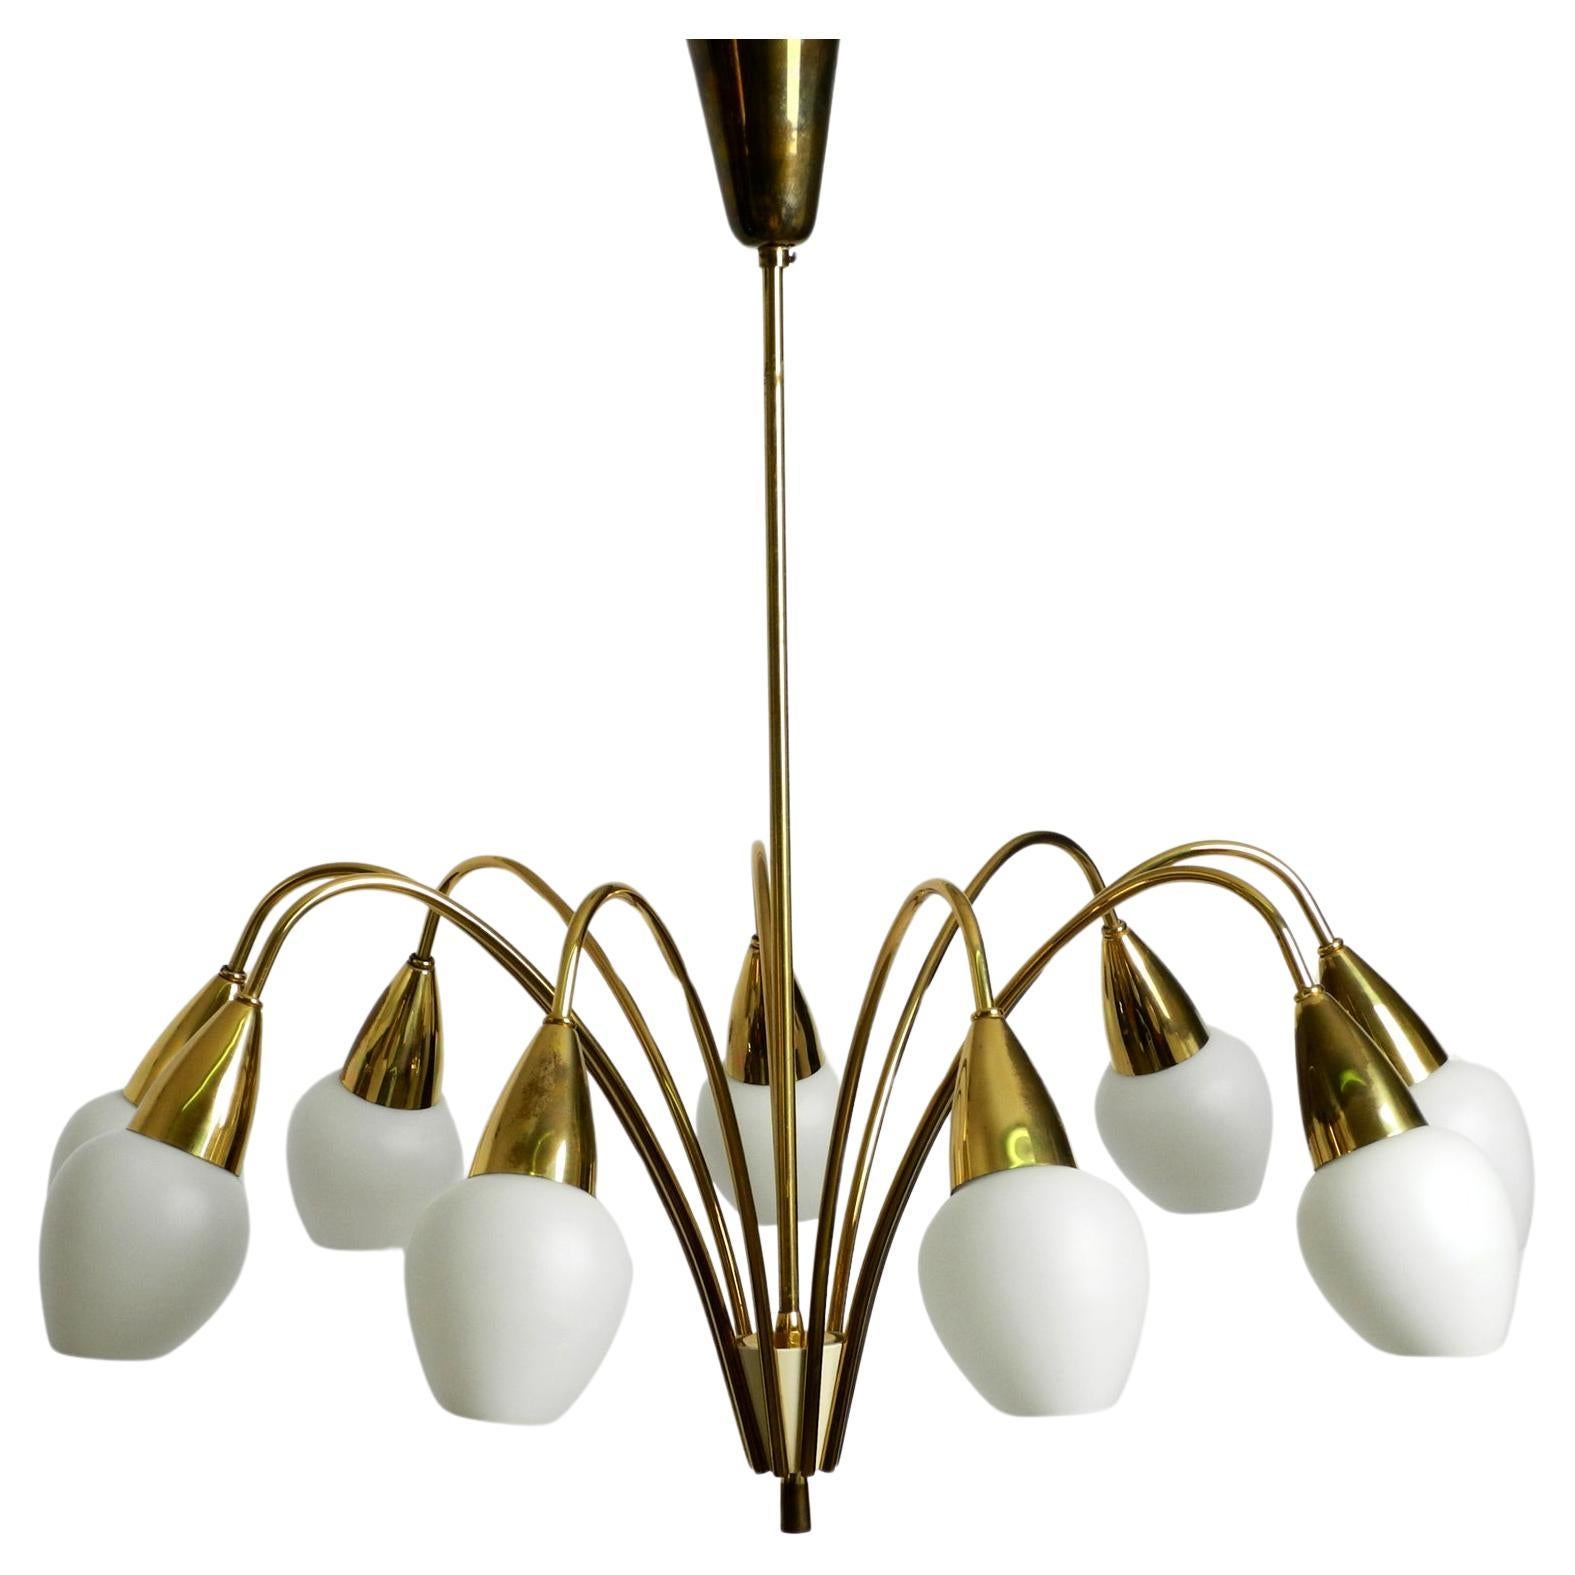 Fantastically 9-armed large mid-century brass chandelier with opal glass shades